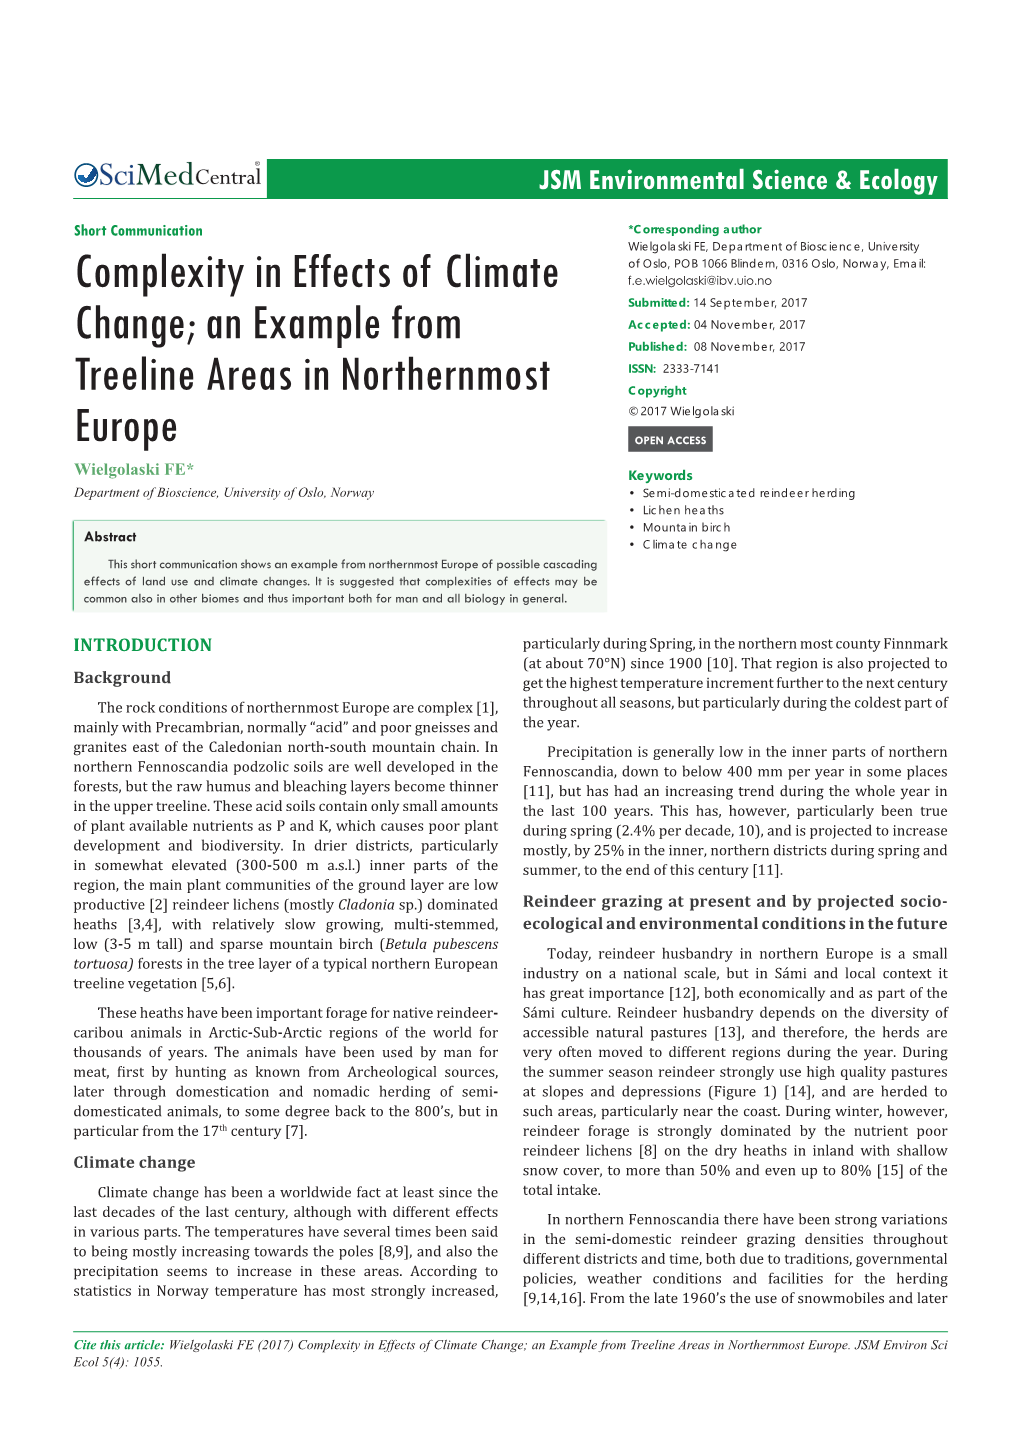 Complexity in Effects of Climate Change; an Example from Treeline Areas in Northernmost Europe